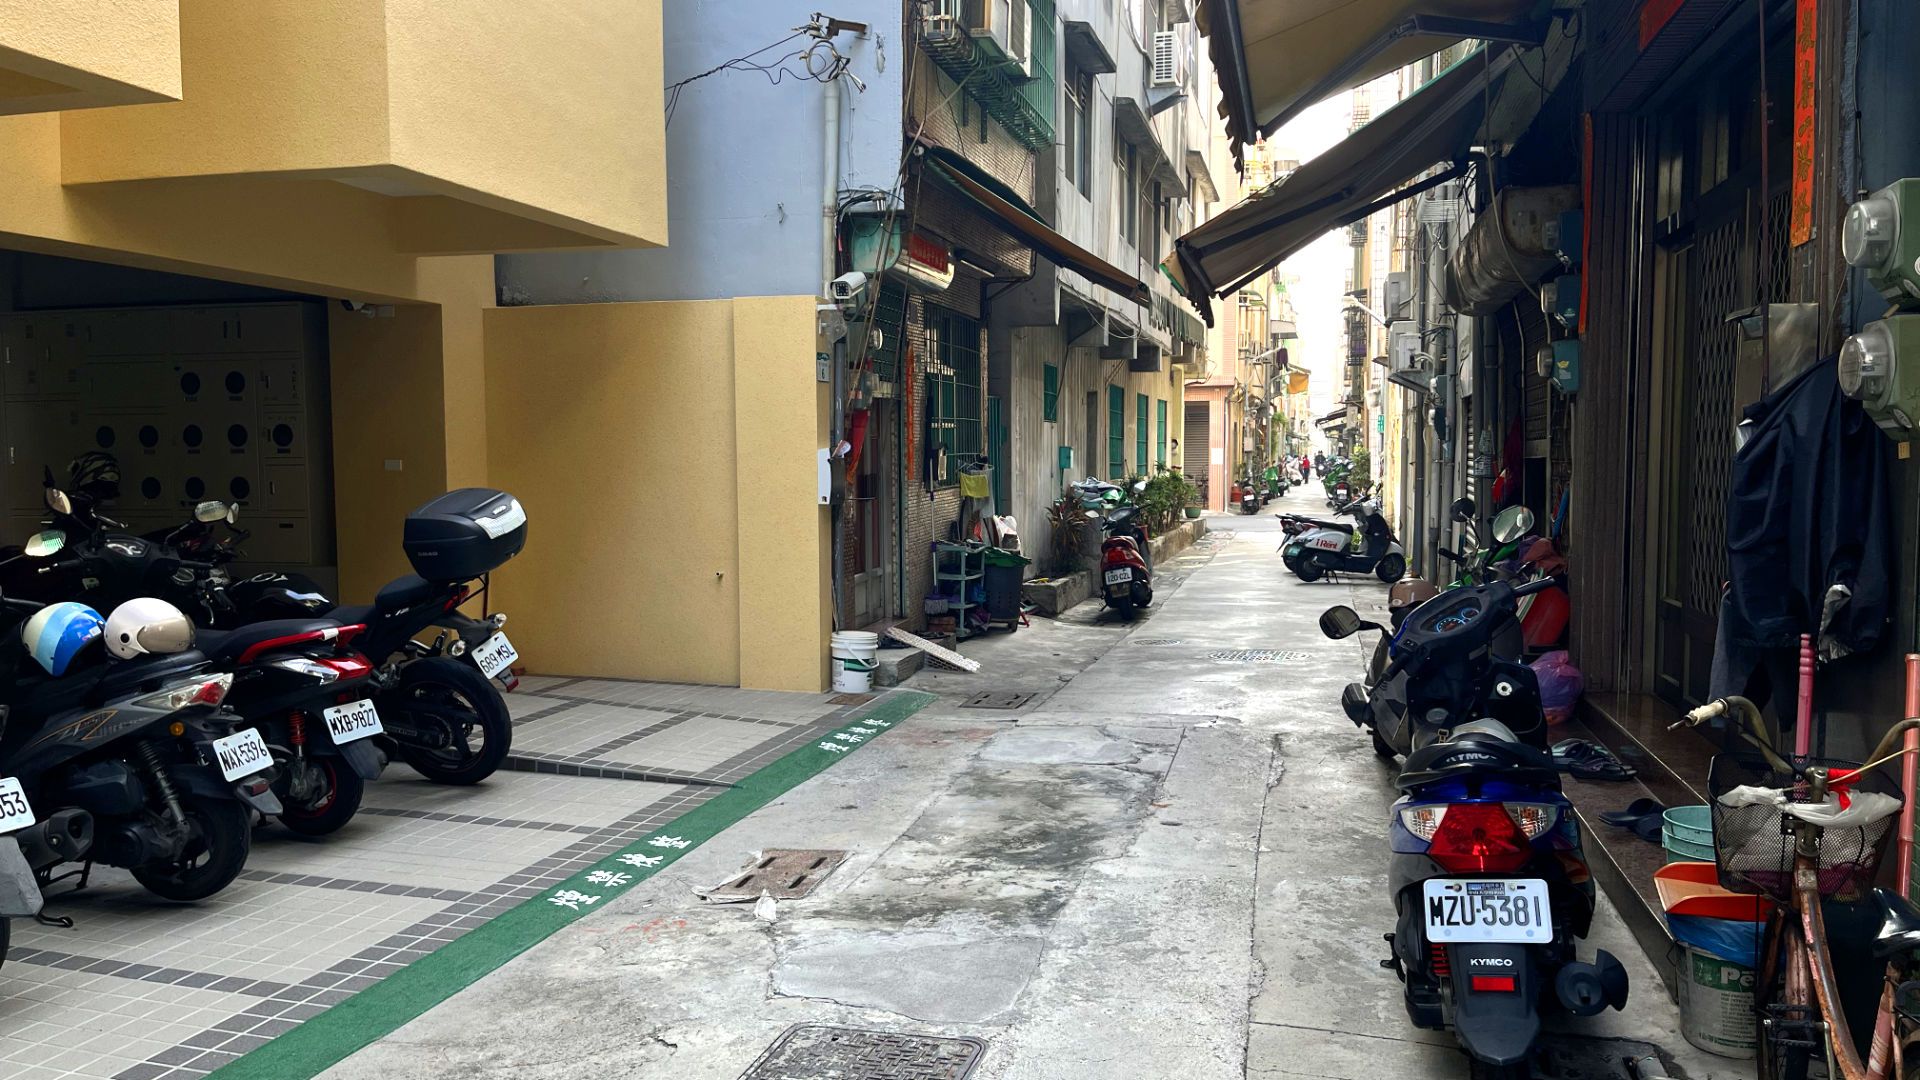 Scooters parked on private parks off an alleyway.